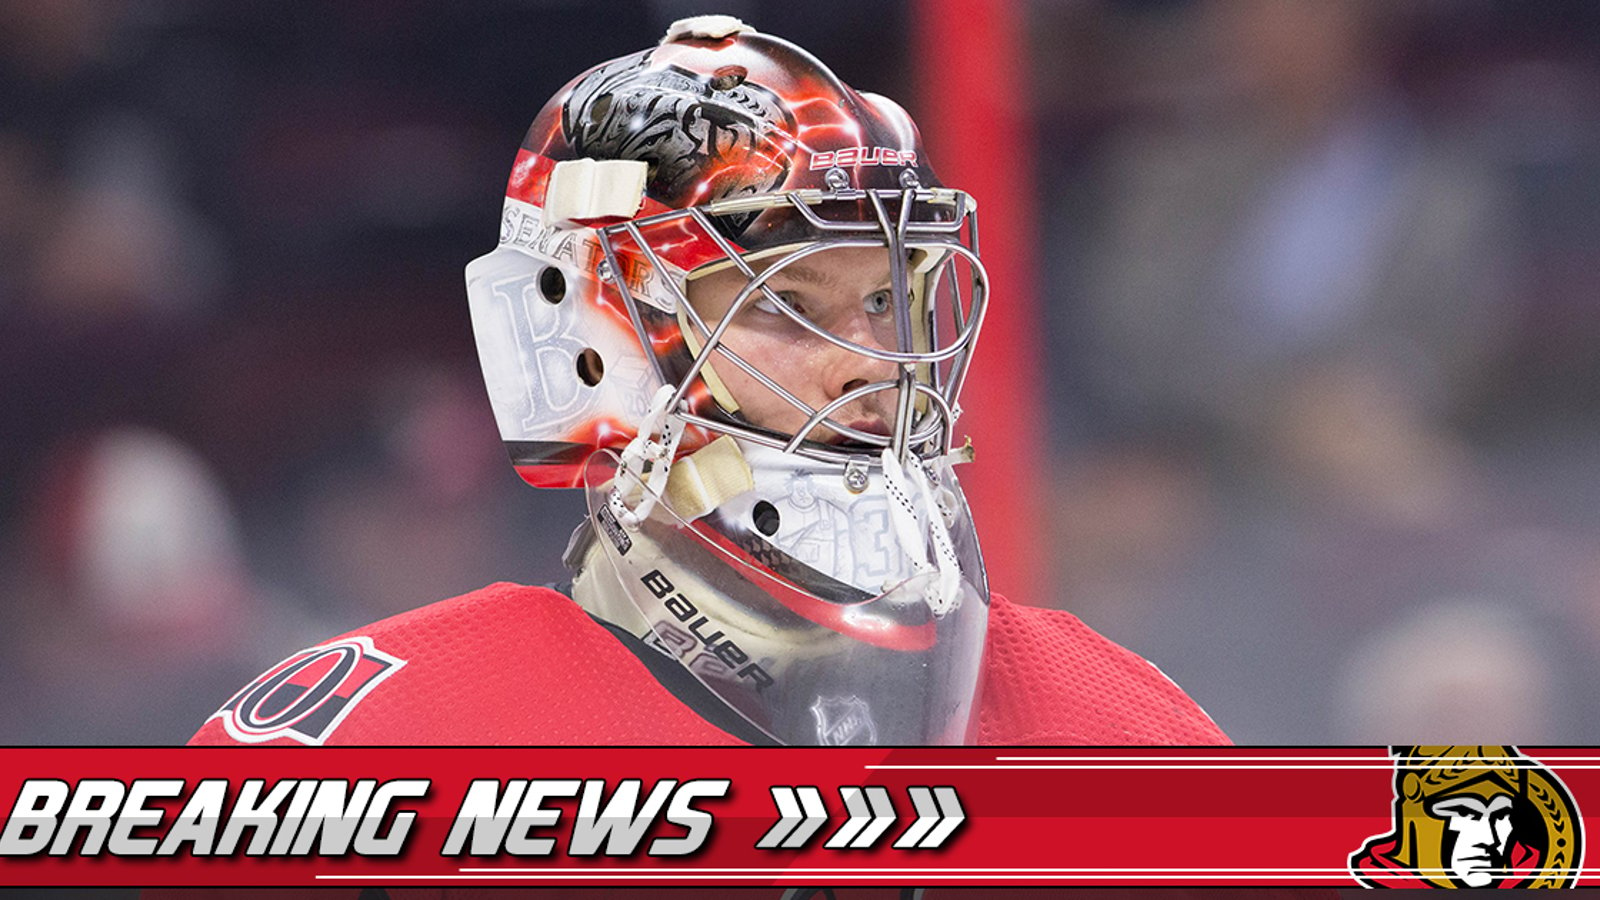 Breaking: Freak injury to Anderson forces Sens to call up Gustavsson